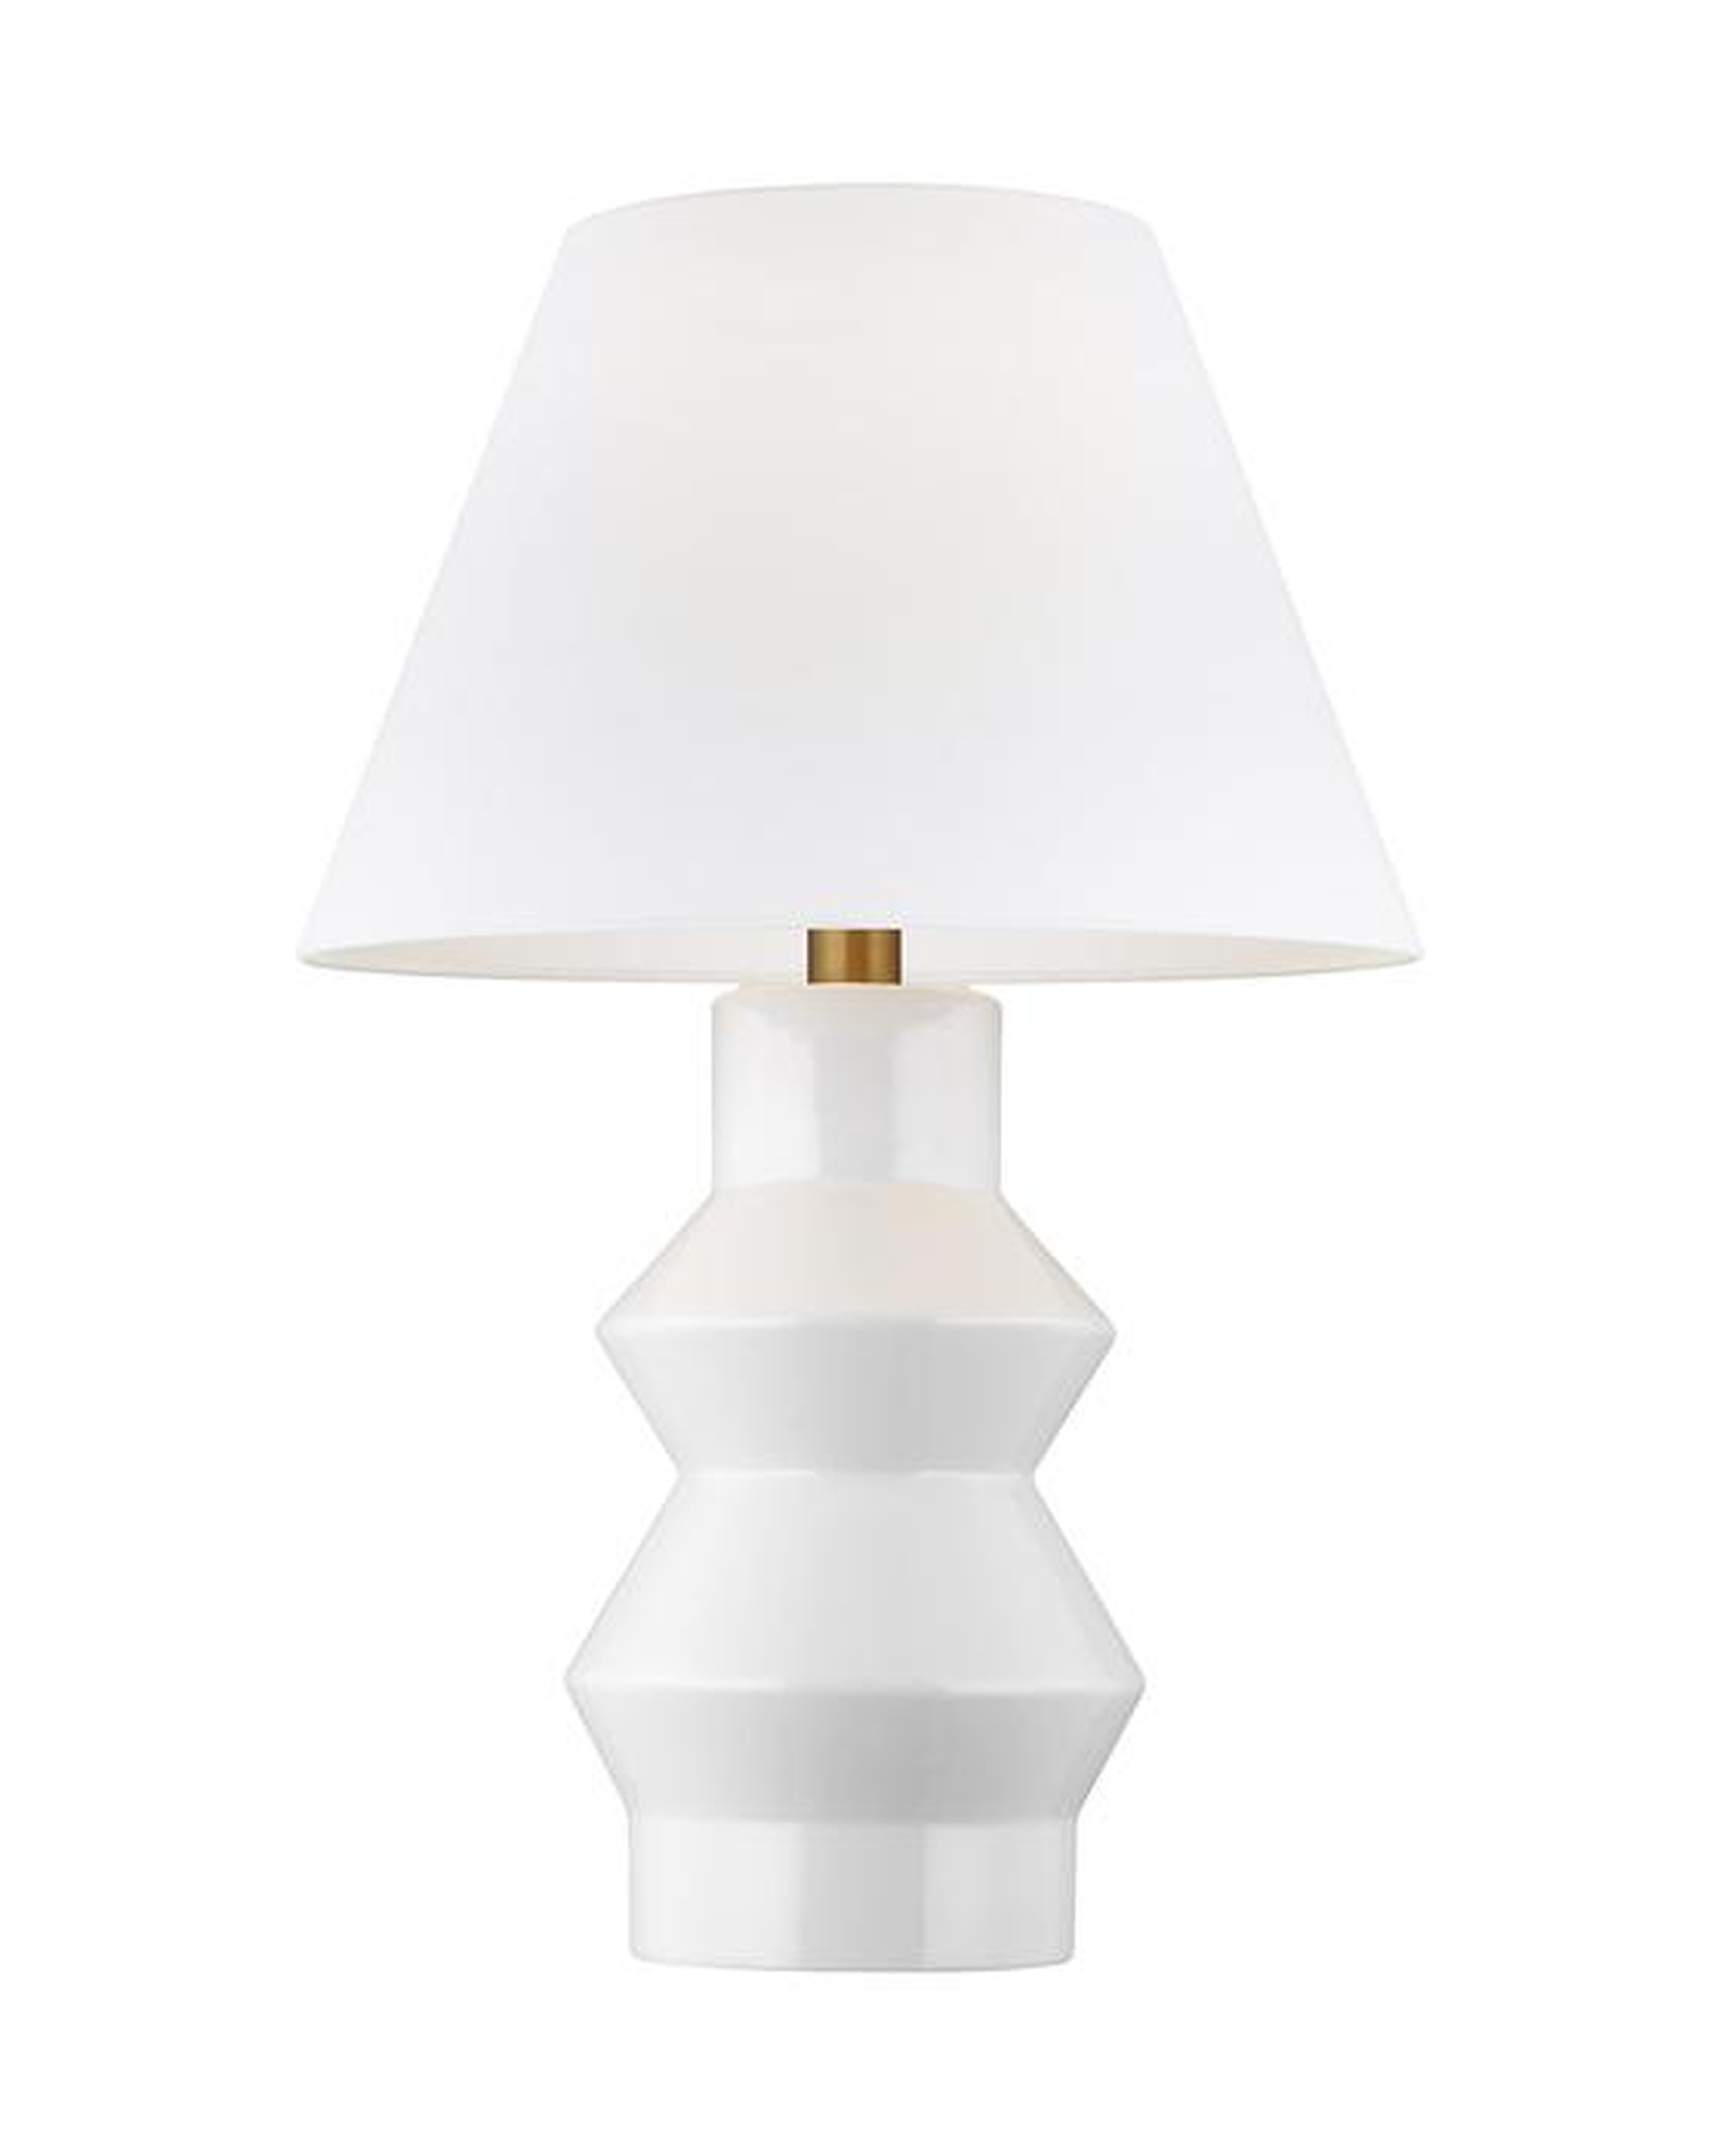 ABACO TABLE LAMP - McGee & Co.